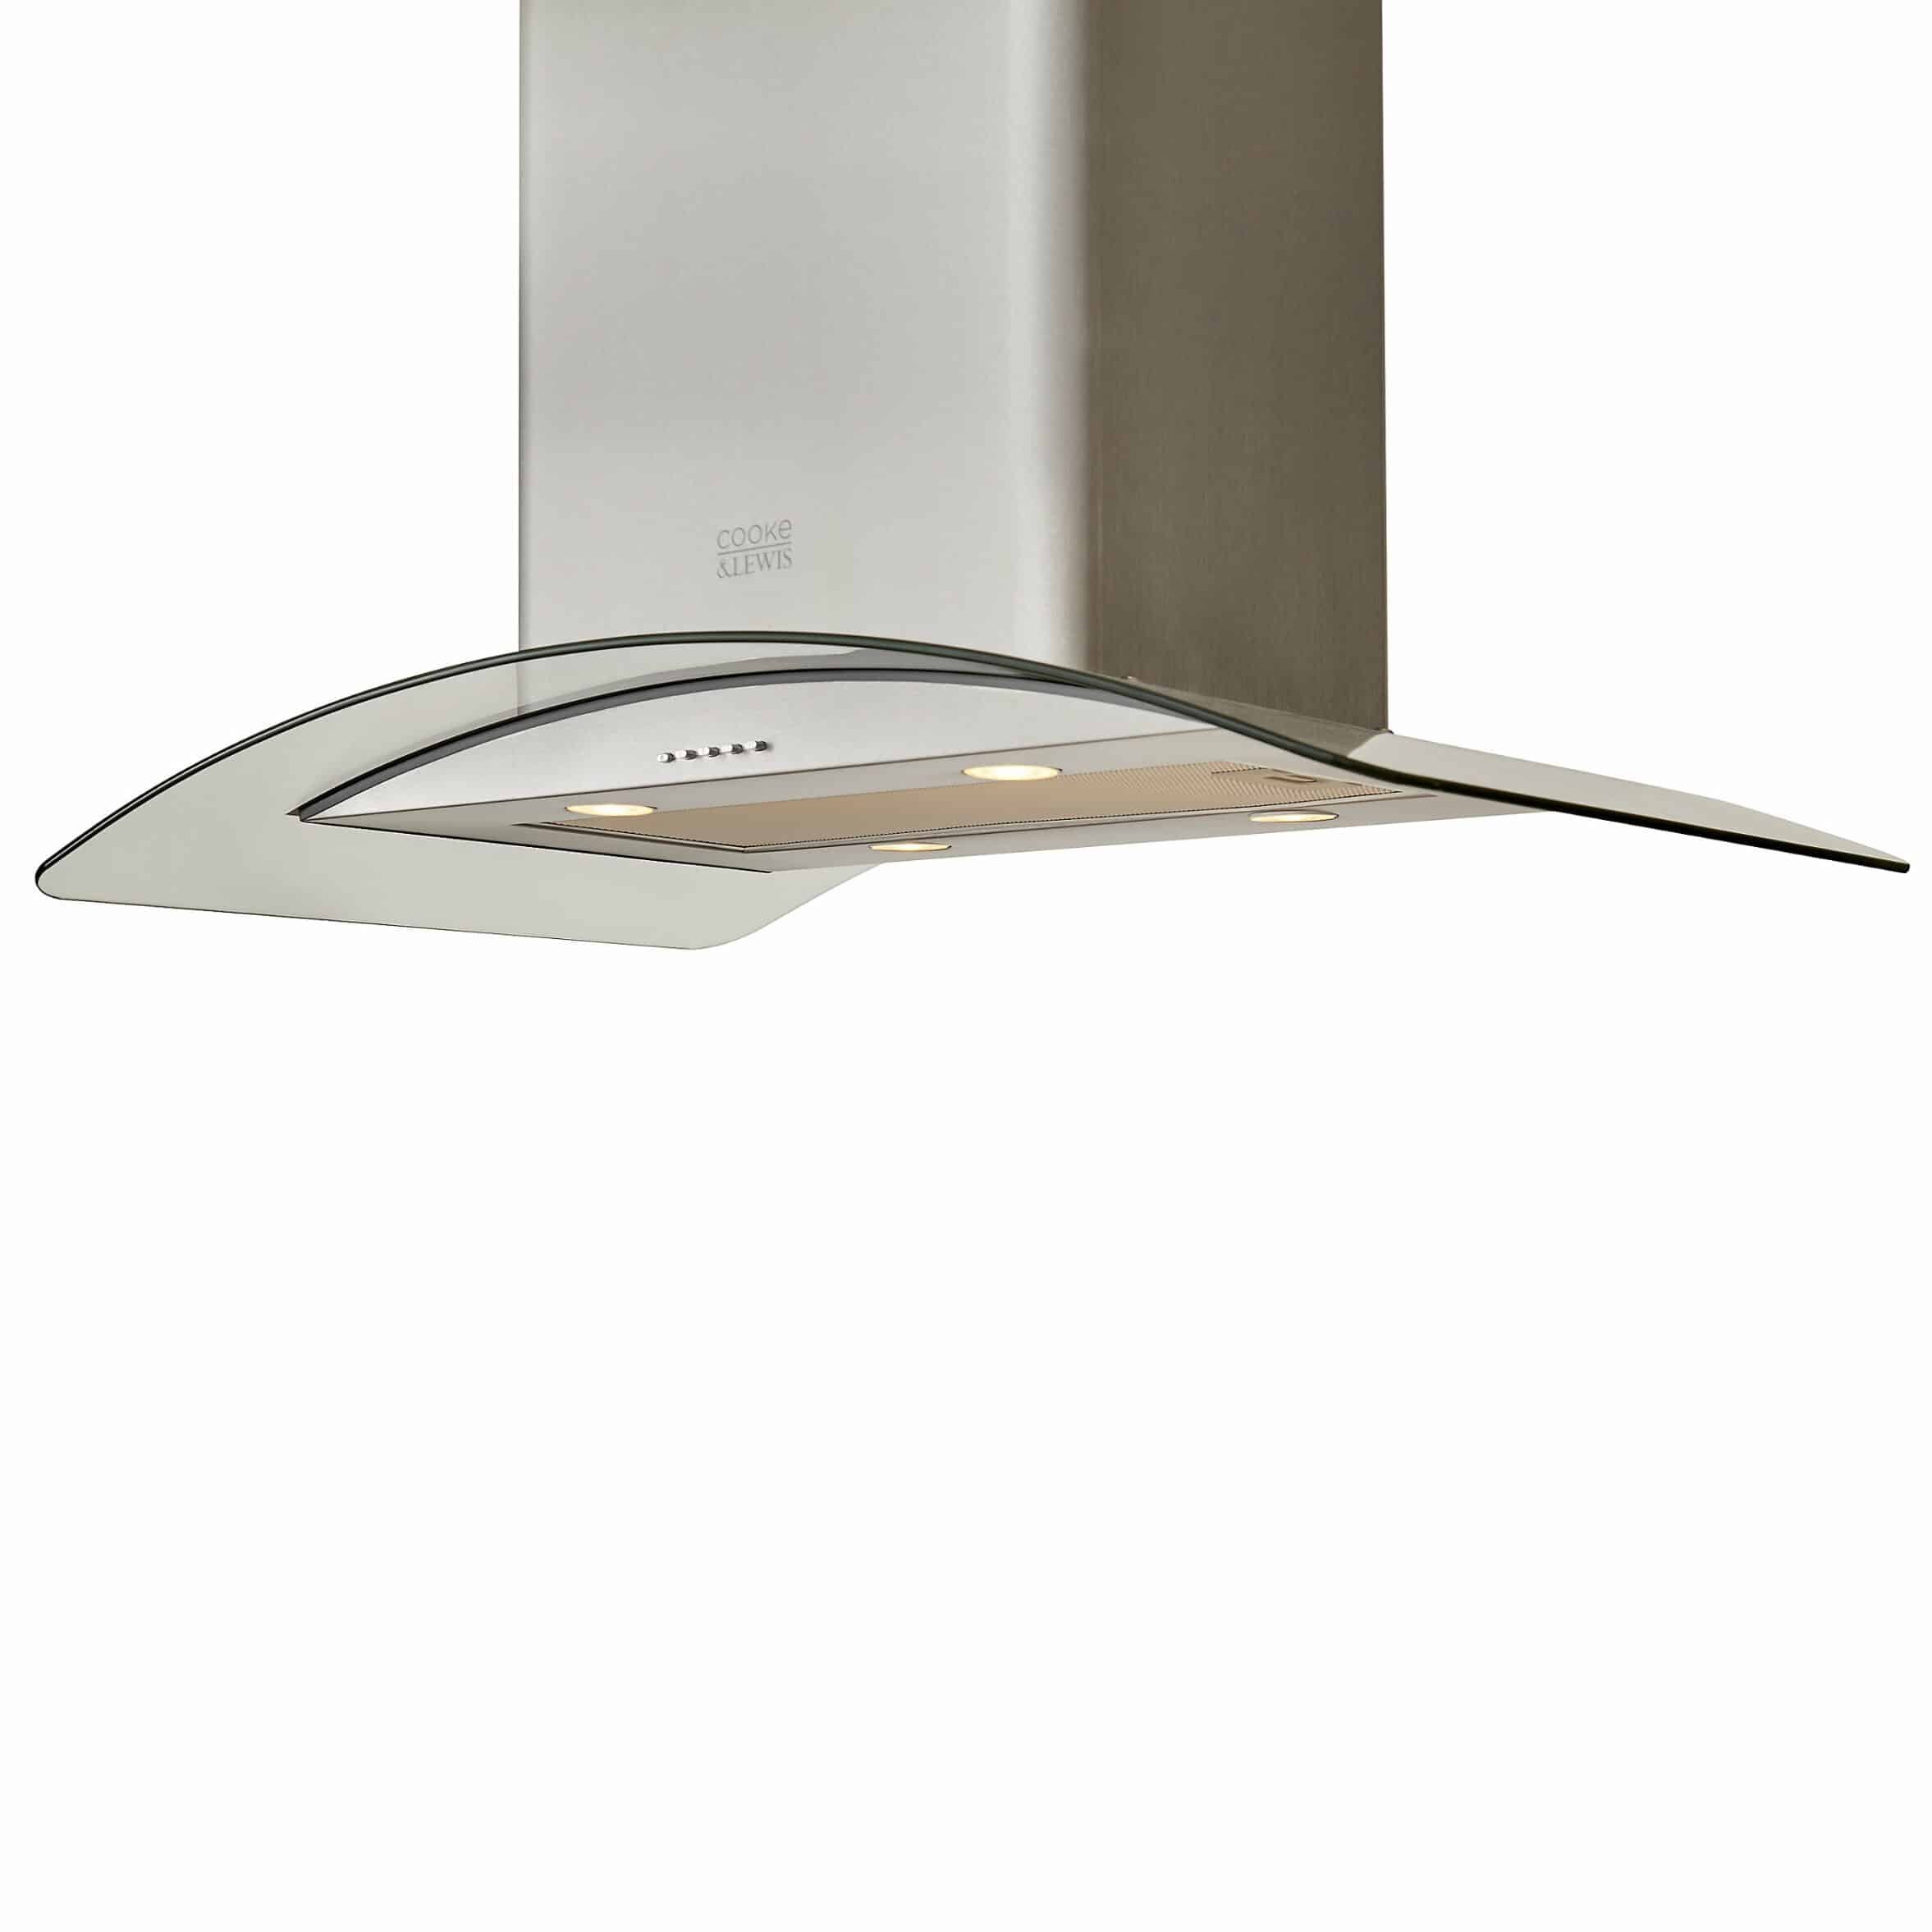 Cooke & Lewis Cooker hood Glass & stainless steel , (W)90cm CLICGS90 2651